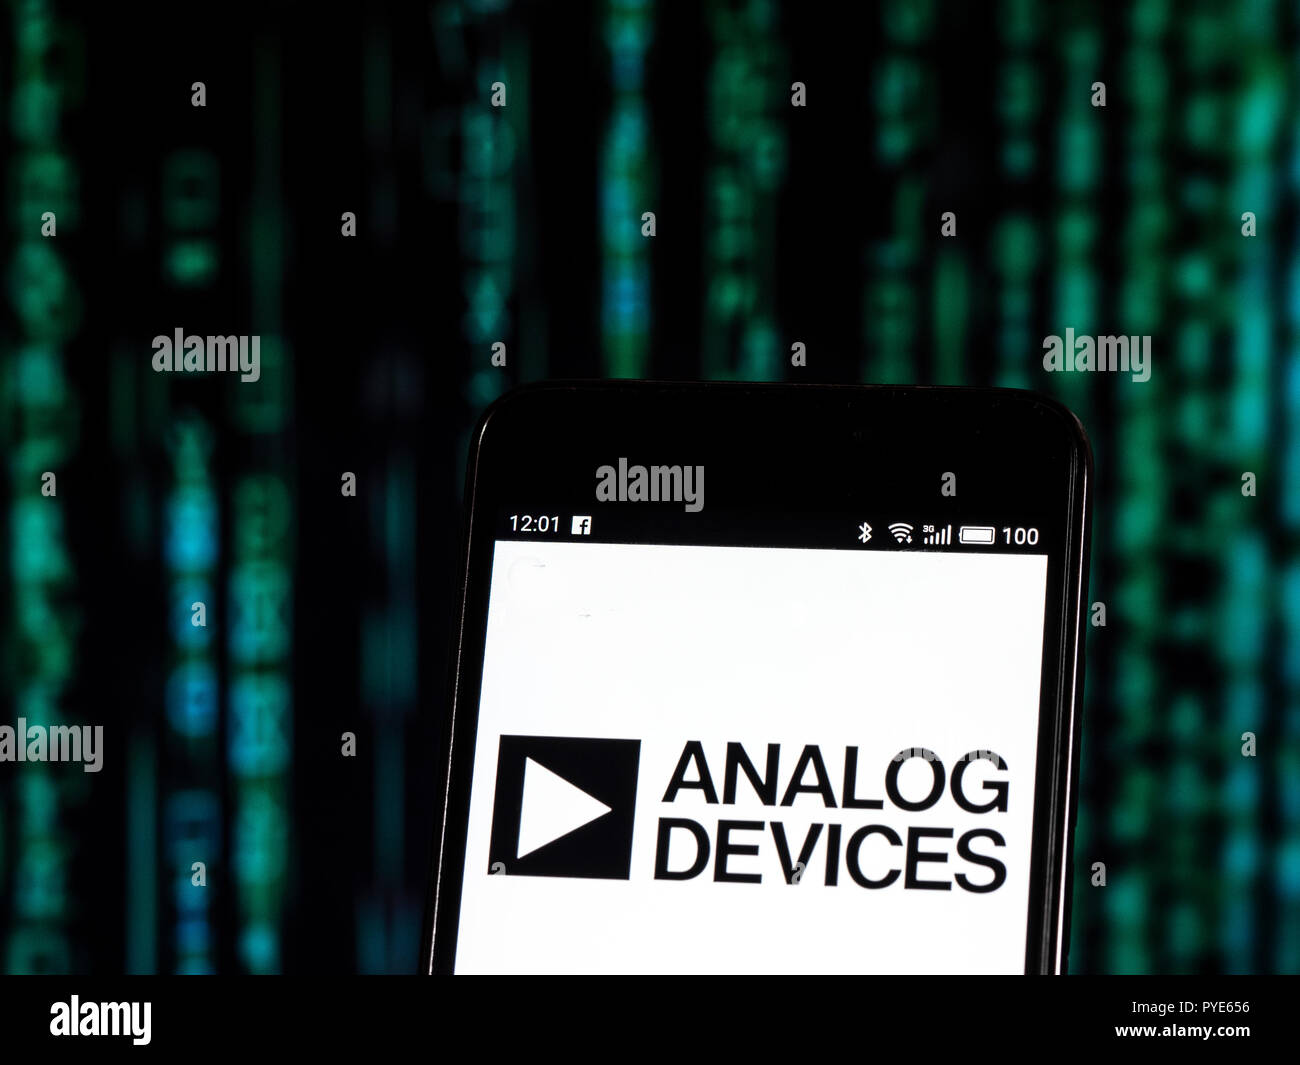 Analog Devices, Inc logo seen displayed on smart phone. Analog Devices, Inc., also known as ADI or Analog, is an American multinational semiconductor company specializing in data conversion and signal processing technology Stock Photo